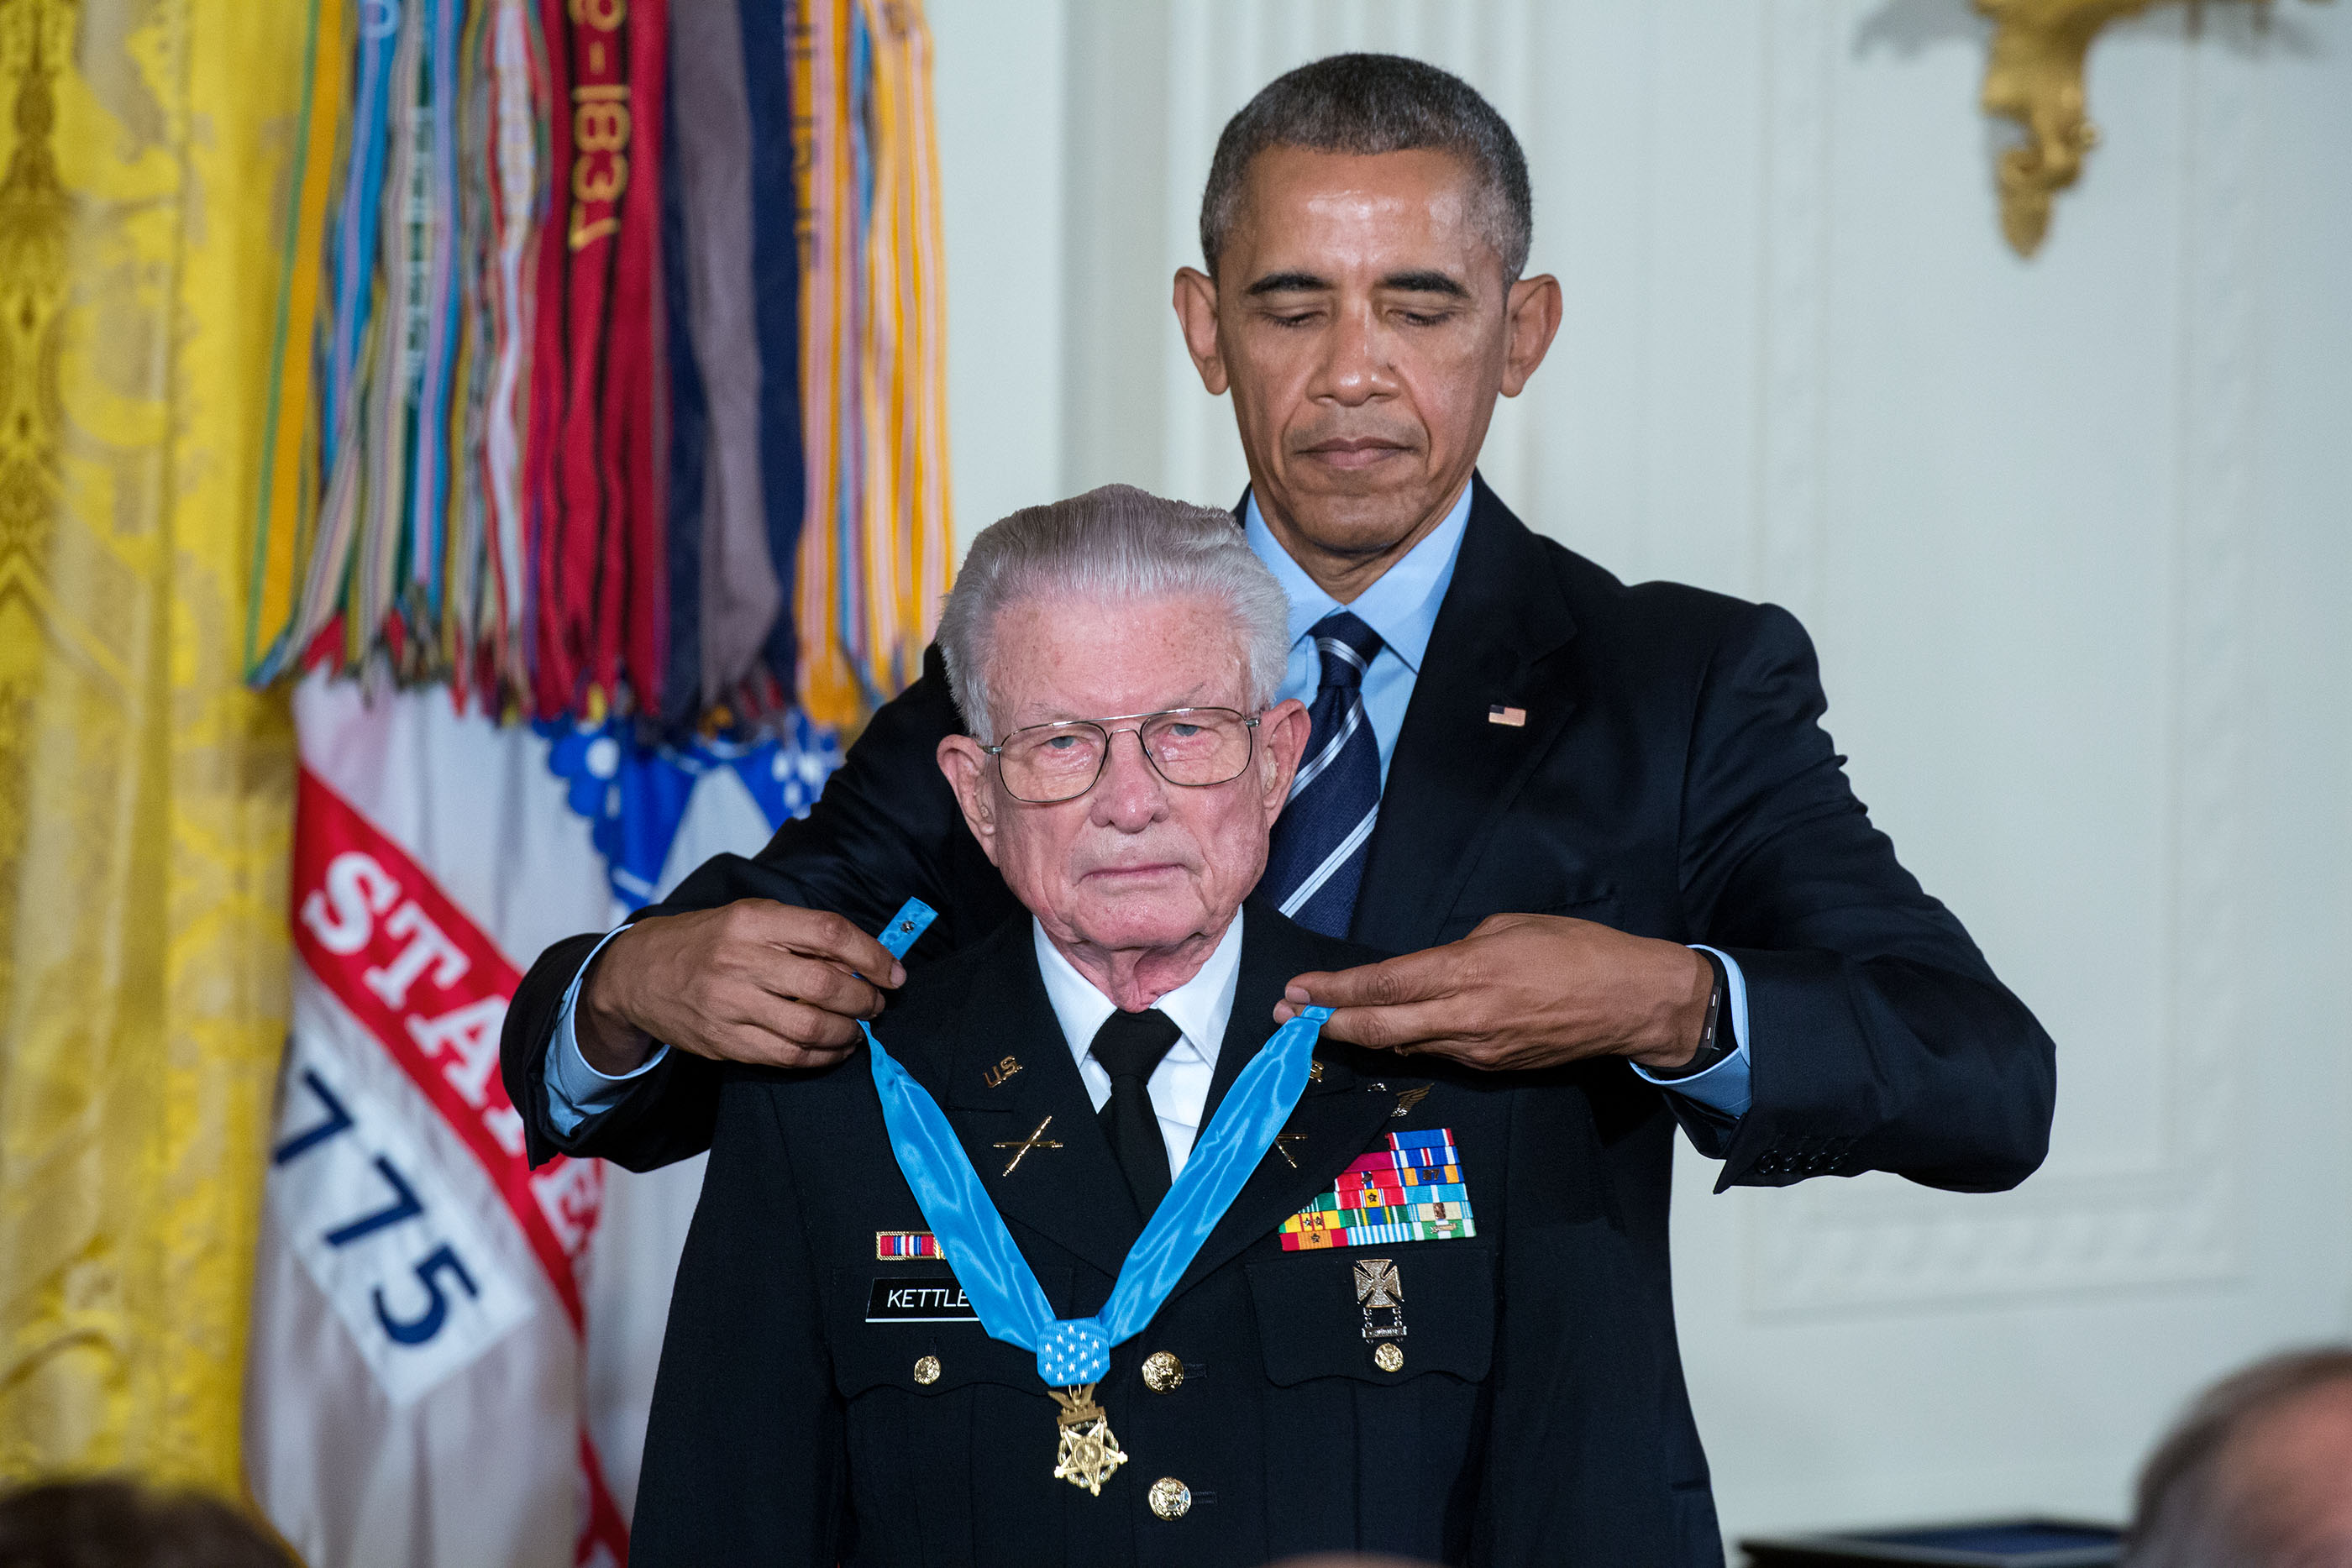 The Obama White House 2016 The Presidential Medal of Freedom